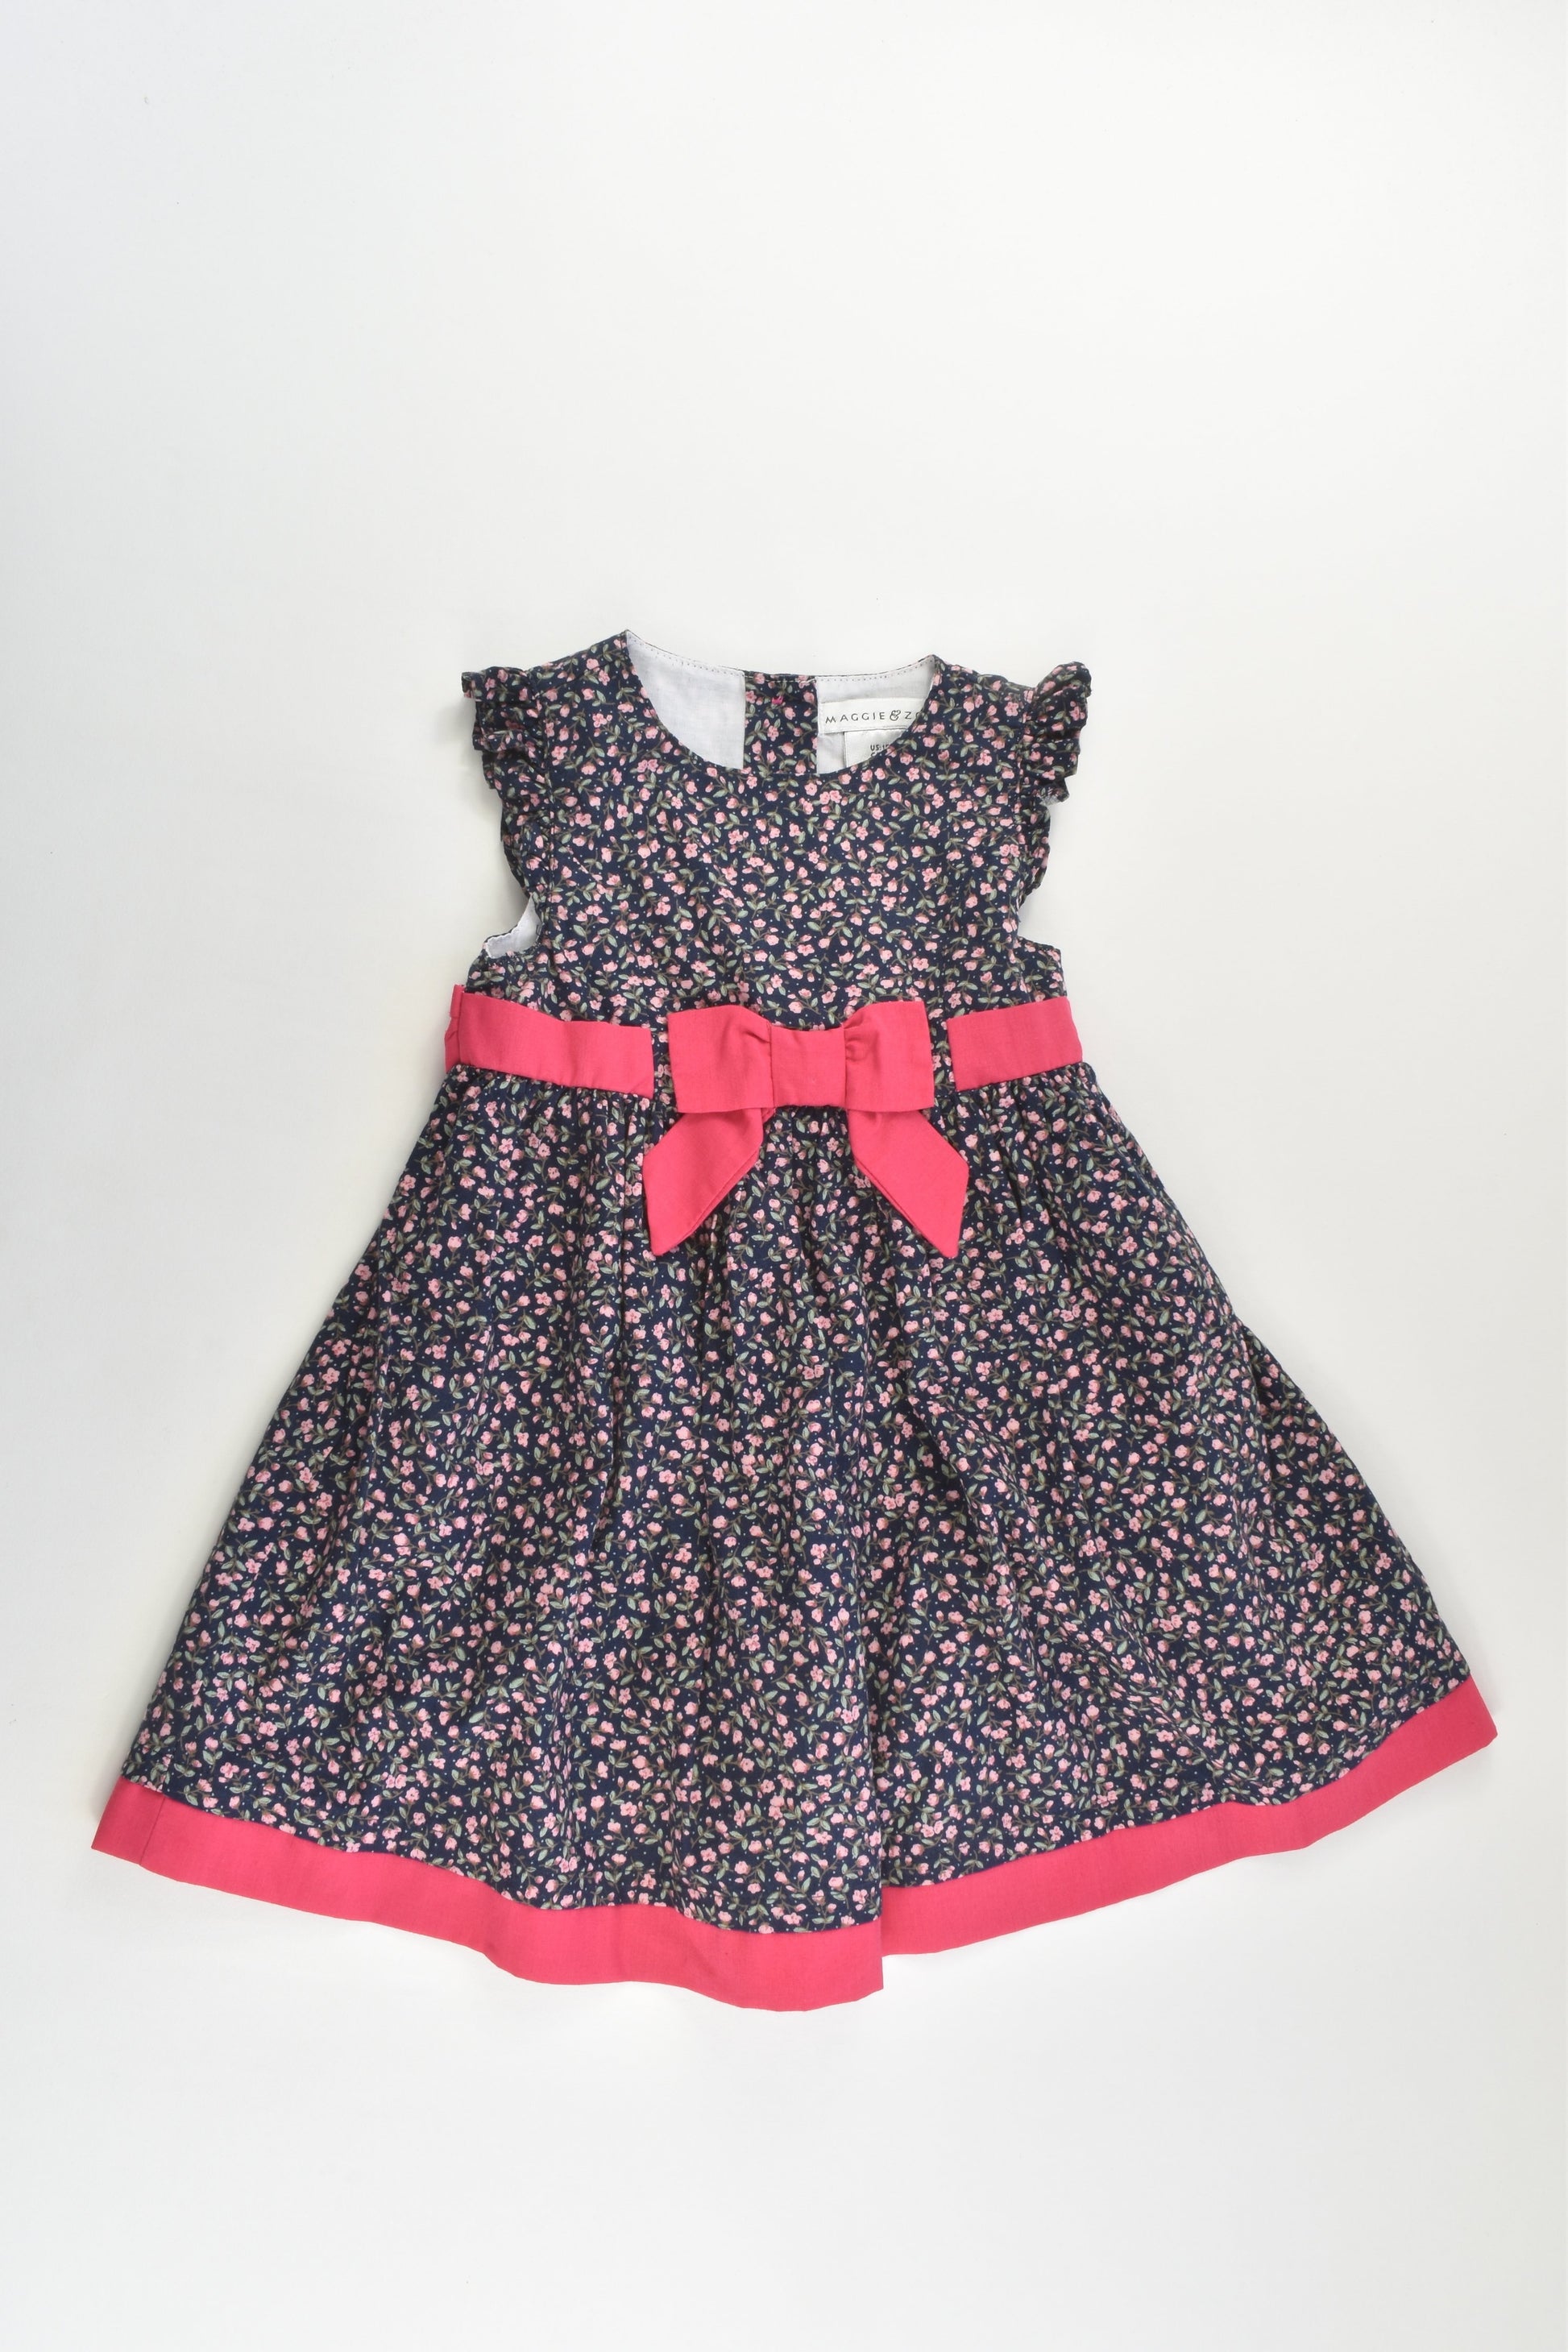 NEW Maggie & Zoe Size 1 (12-18 months, 86 cm) Lined Floral Dress